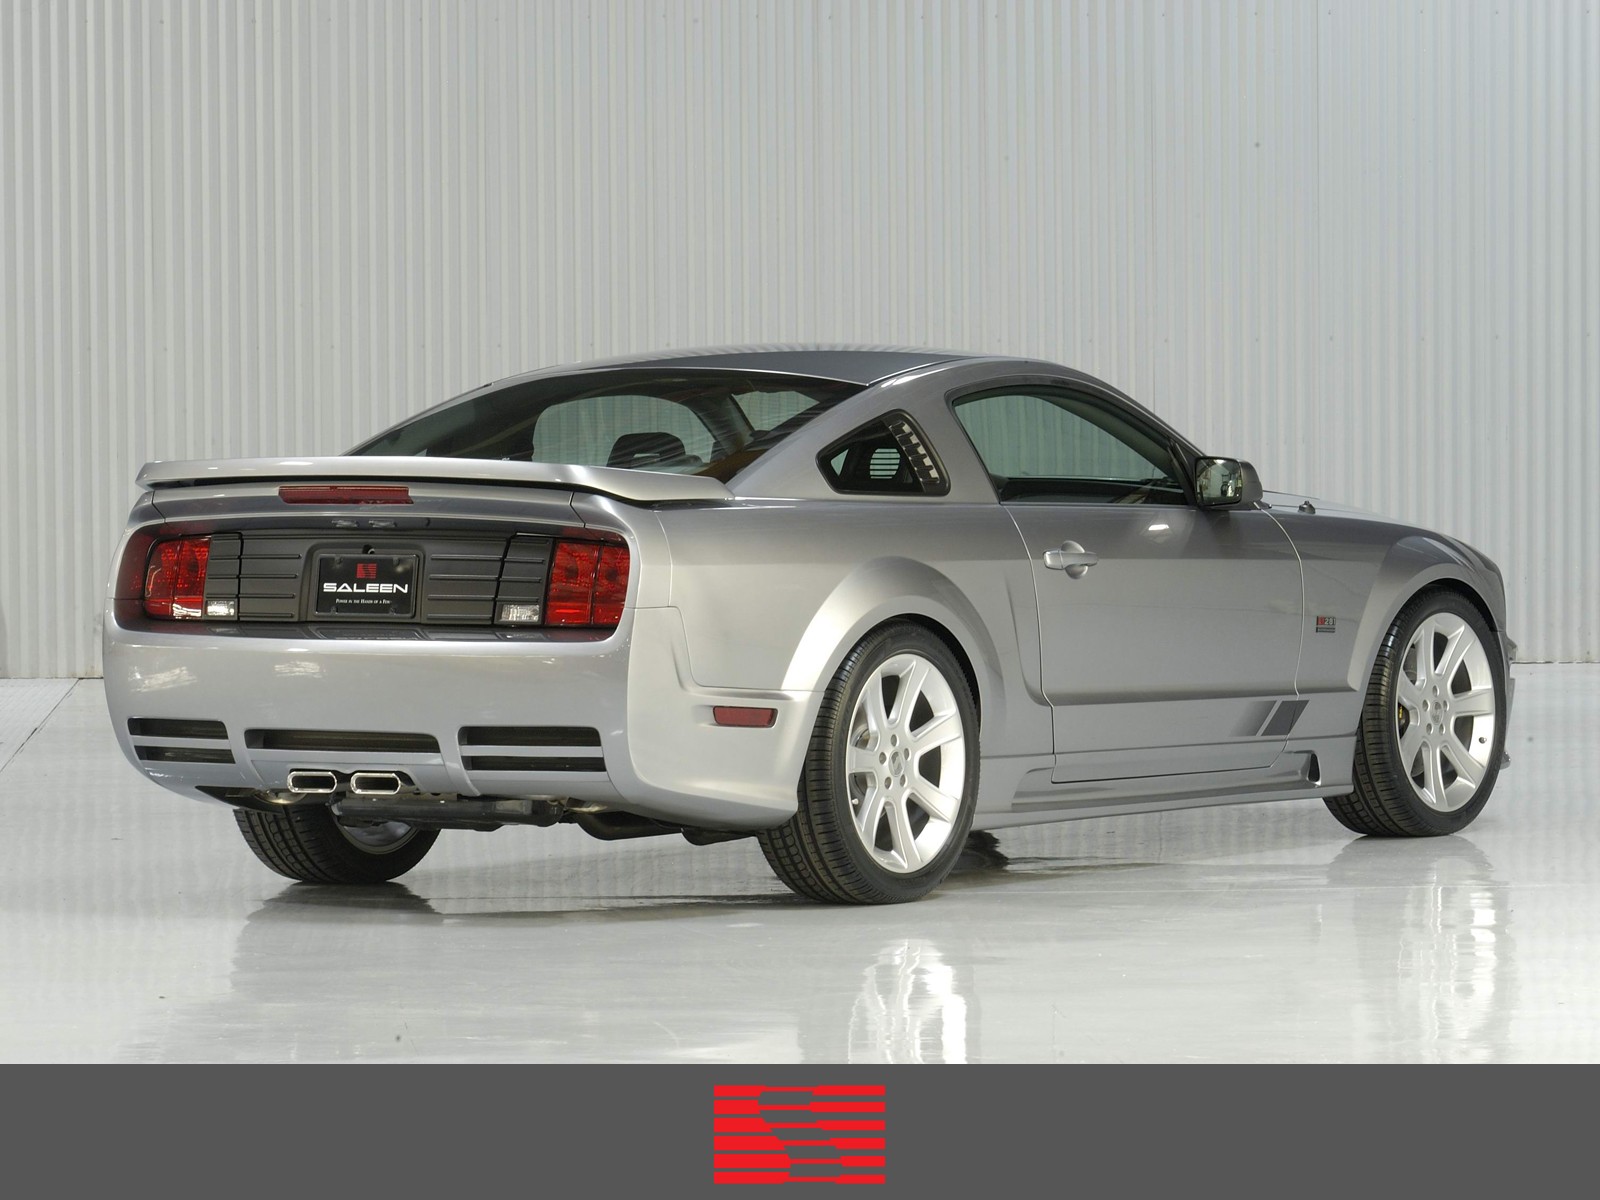 Mad 4 Wheels - 2005 Ford Saleen Mustang - Best quality free high ...